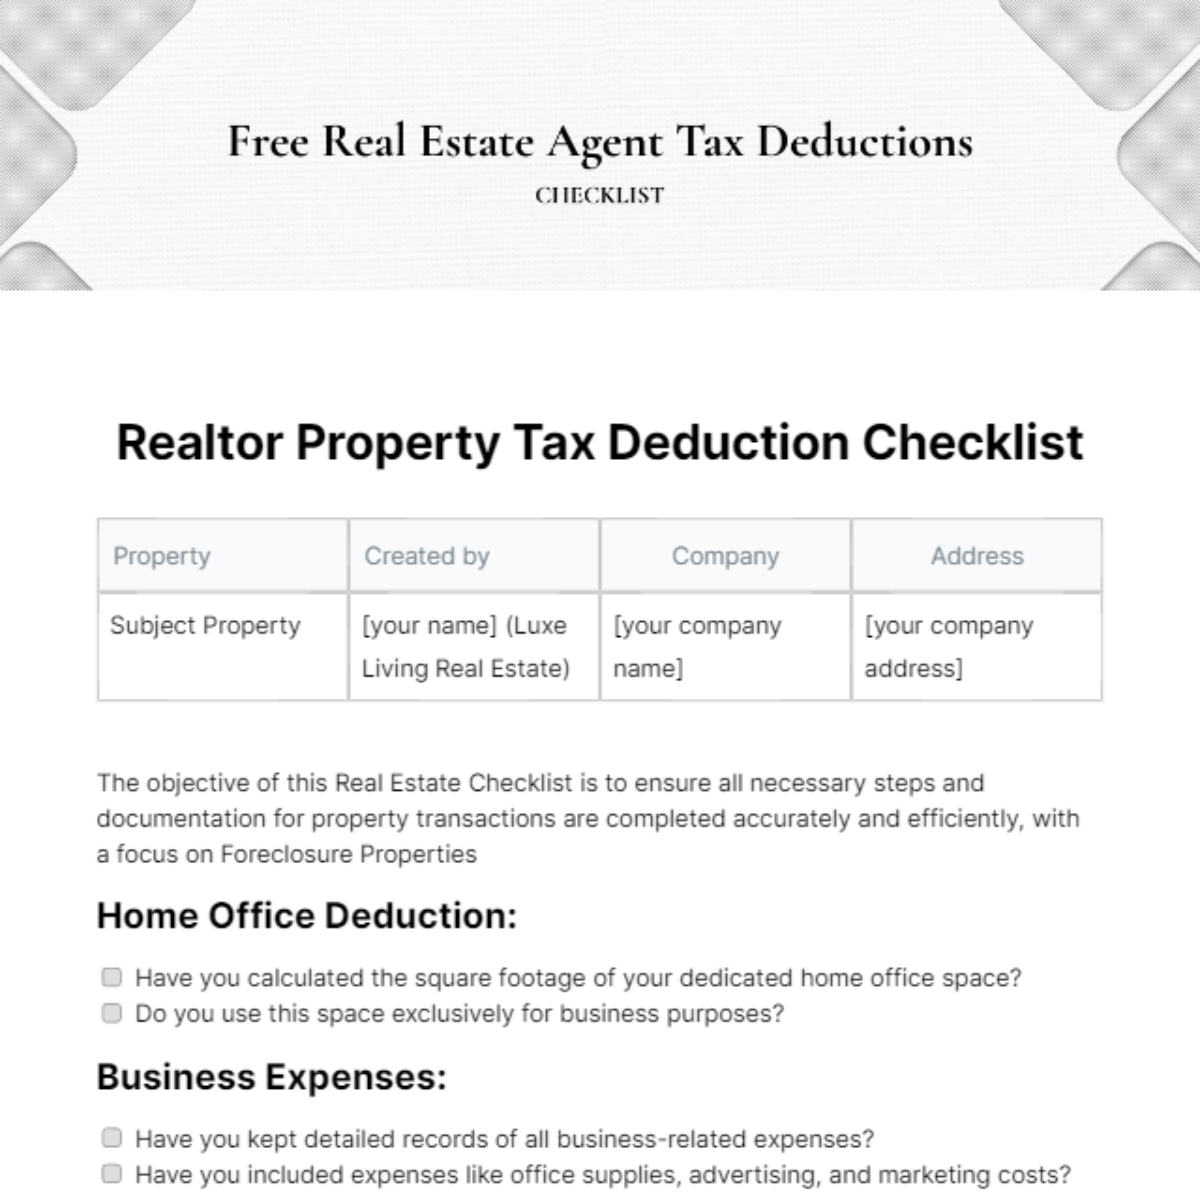 Real Estate Agent Tax Deductions Checklist Template